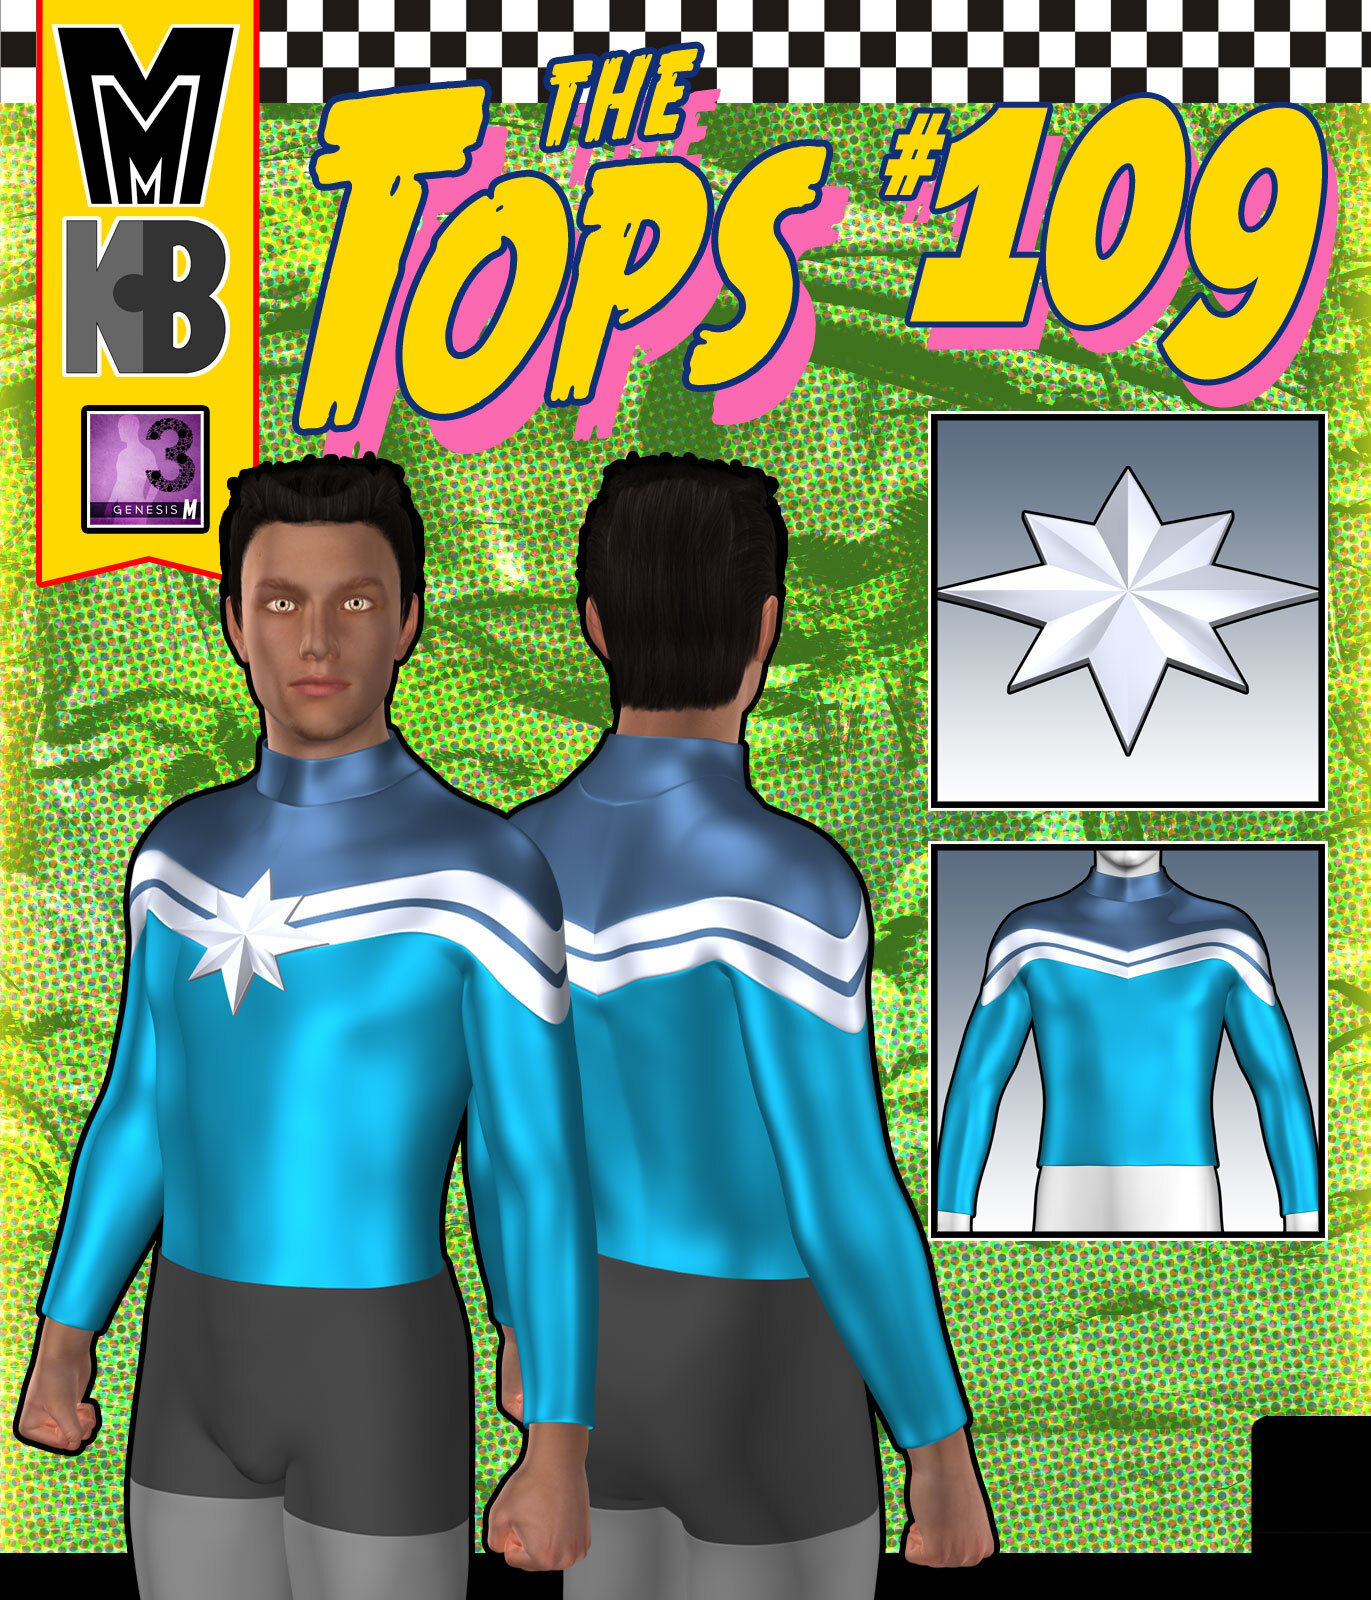 Tops 109 MMKBG3M by: MightyMite, 3D Models by Daz 3D